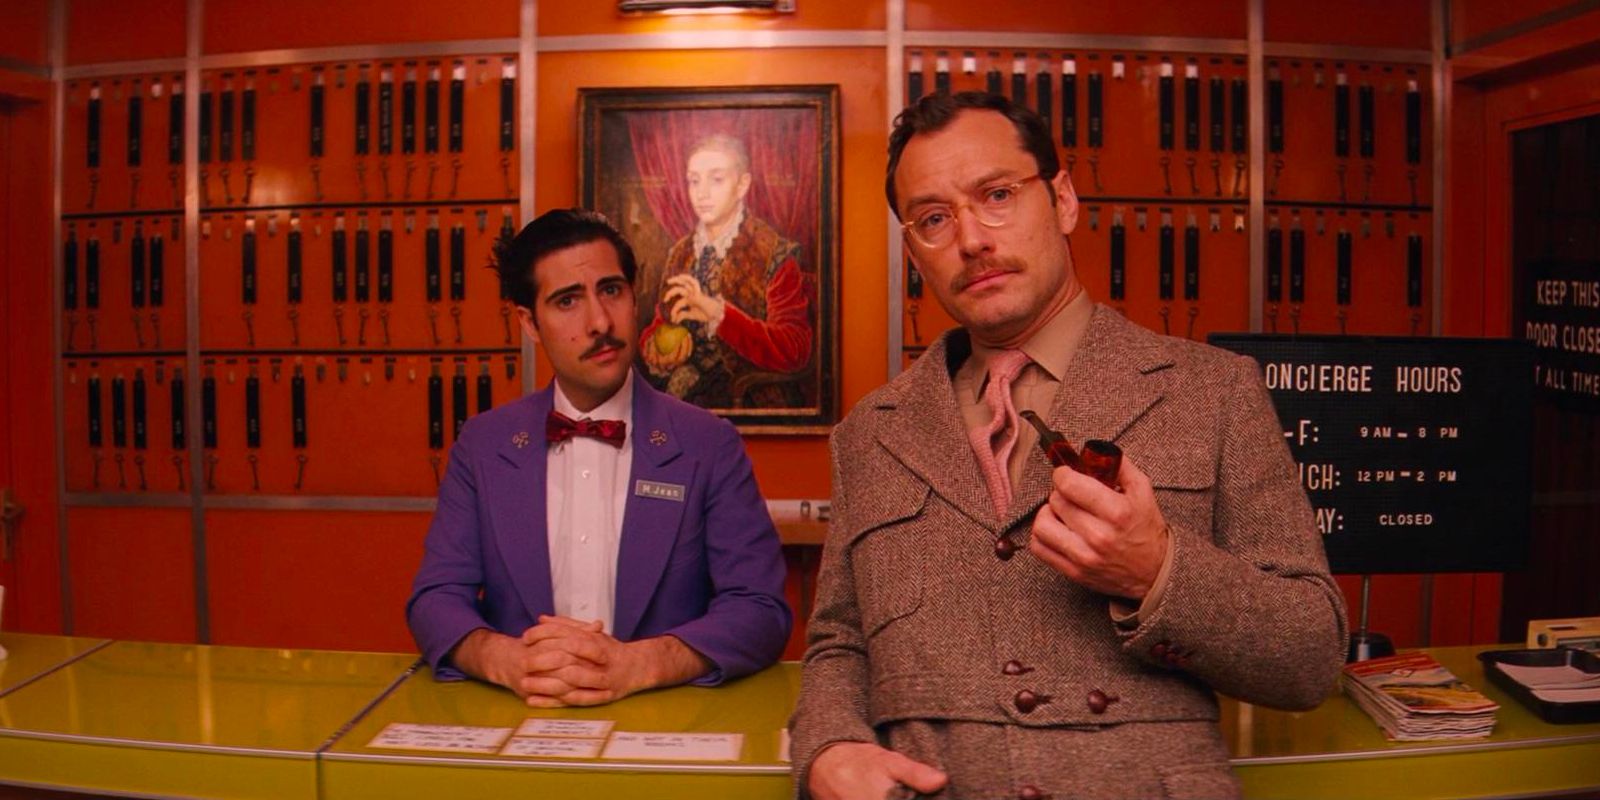 M. Jean, a concierge at the Grand Budapest Hotel, talks to a guest about the hotel's owner.